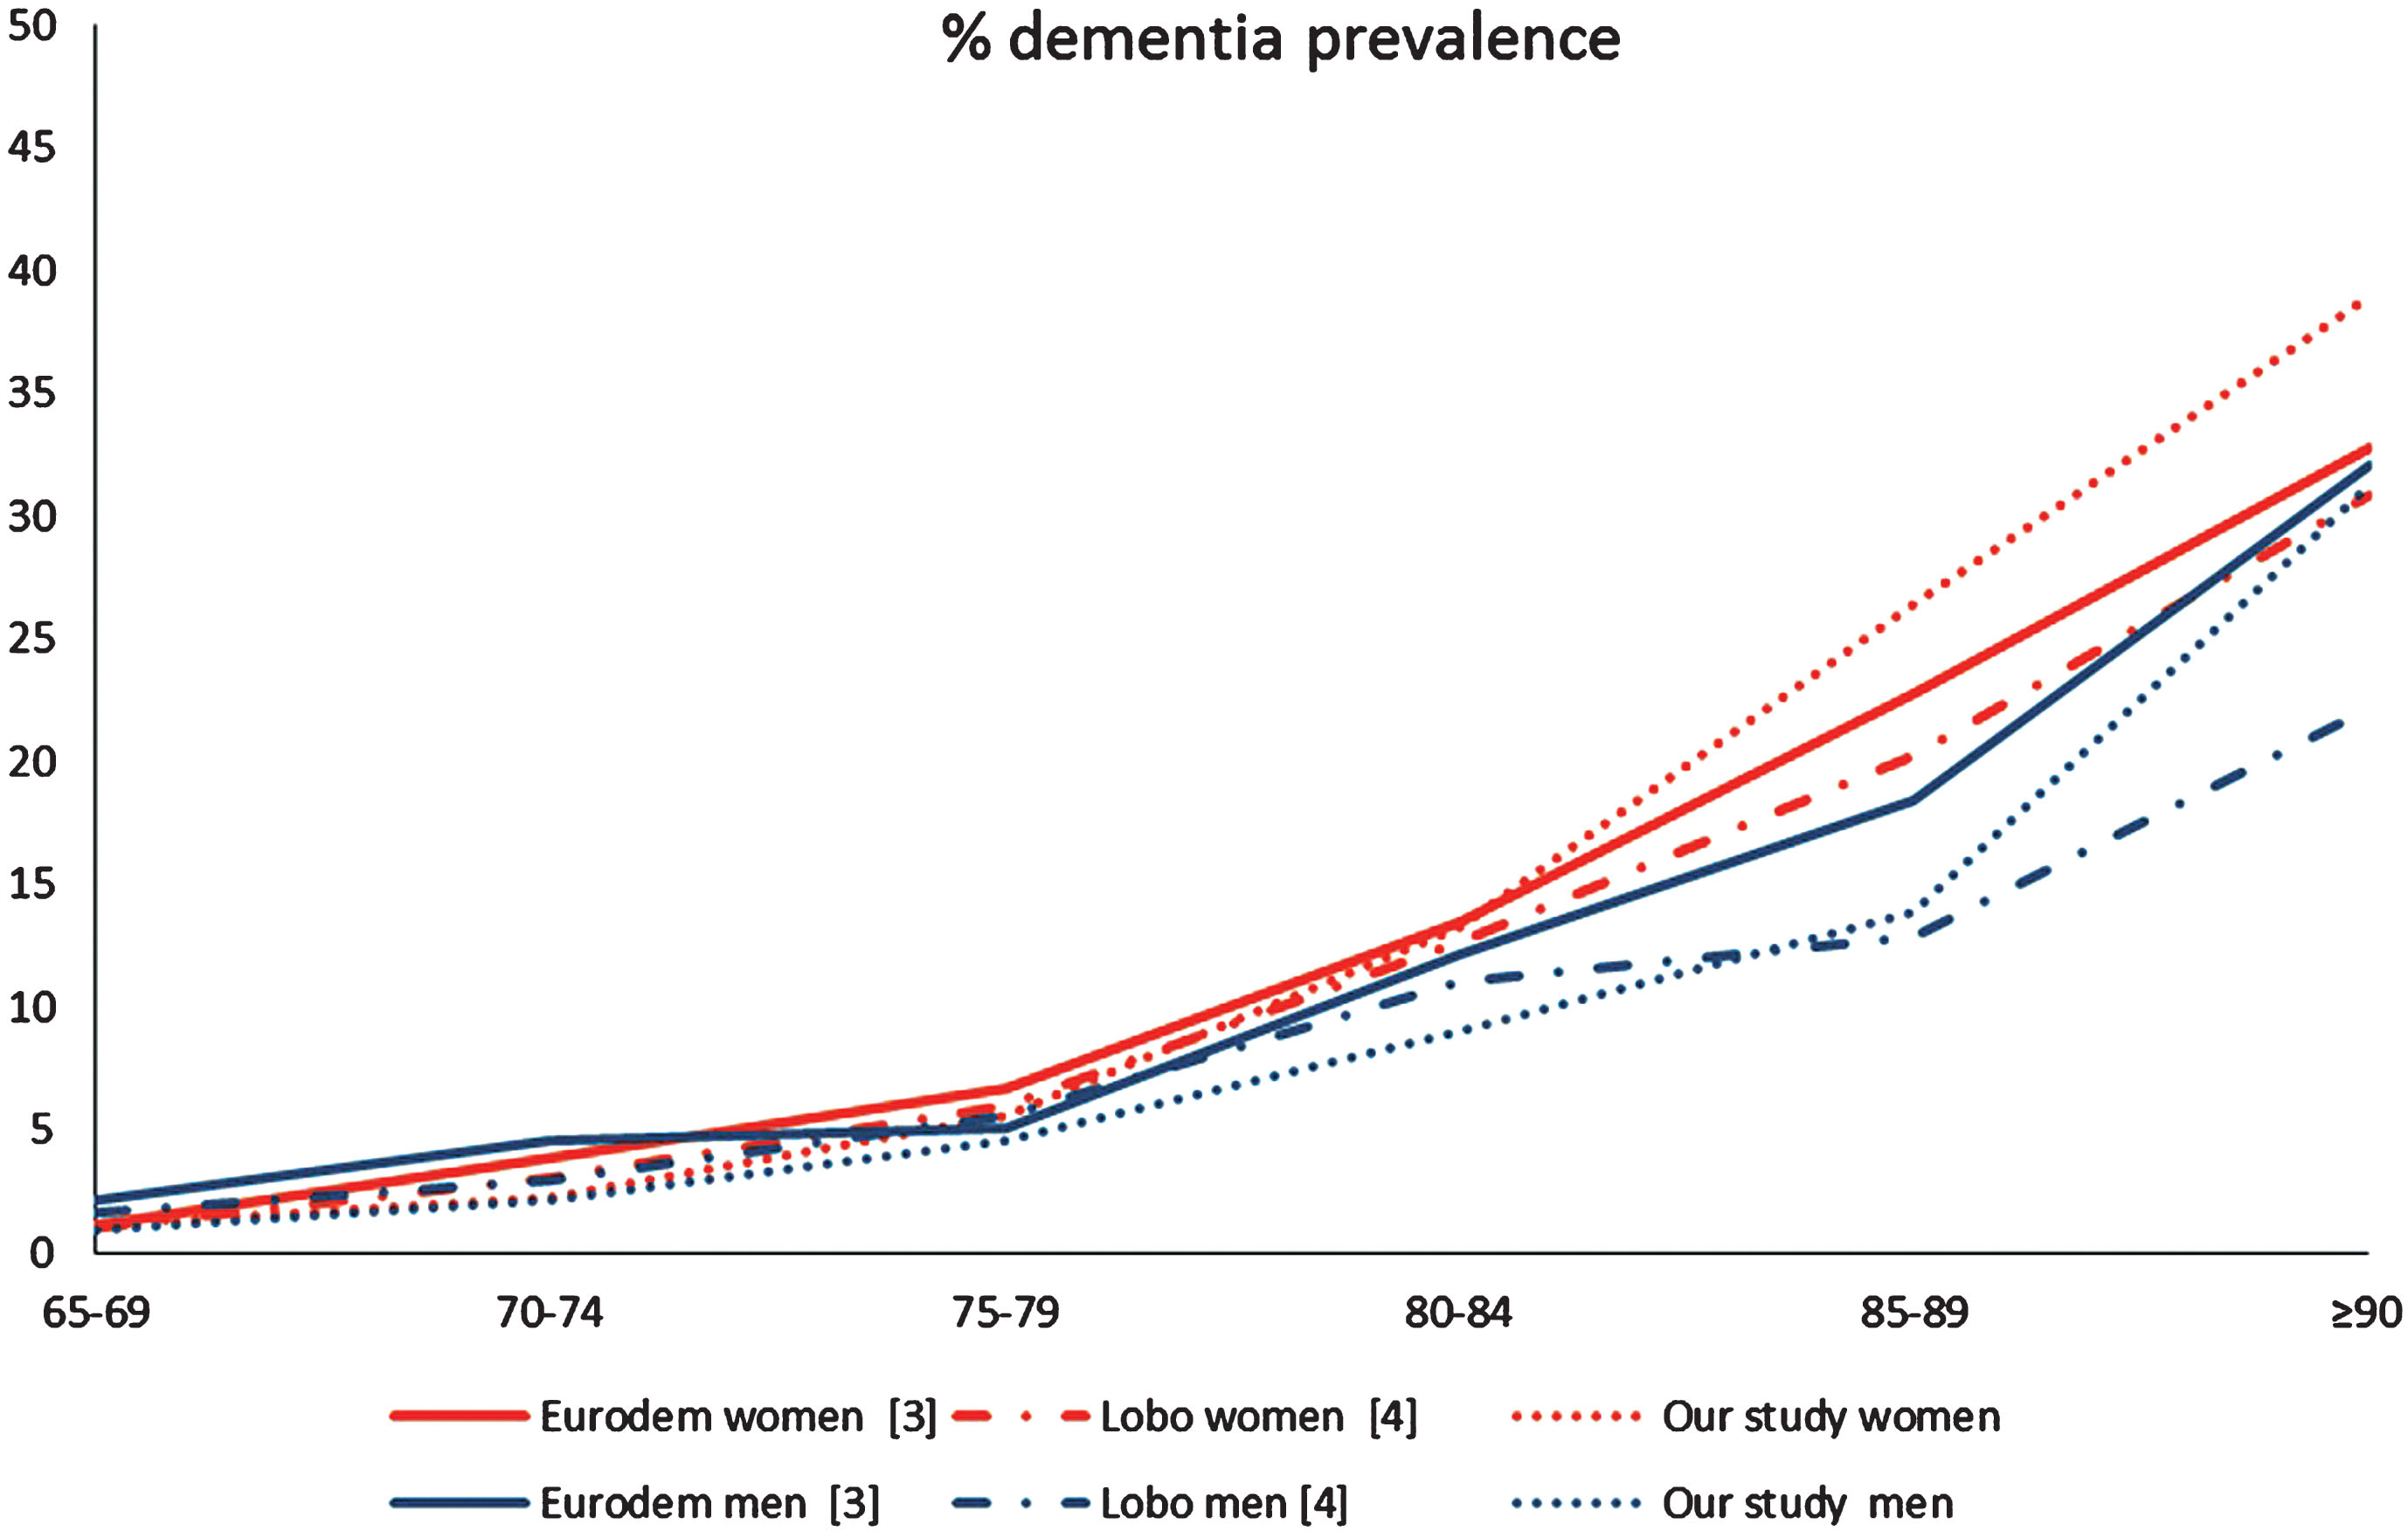 Age- and sex-specific prevalence rate in three European systematic reviews (Eurodem project [3], Lobo’s study [4], and our study).